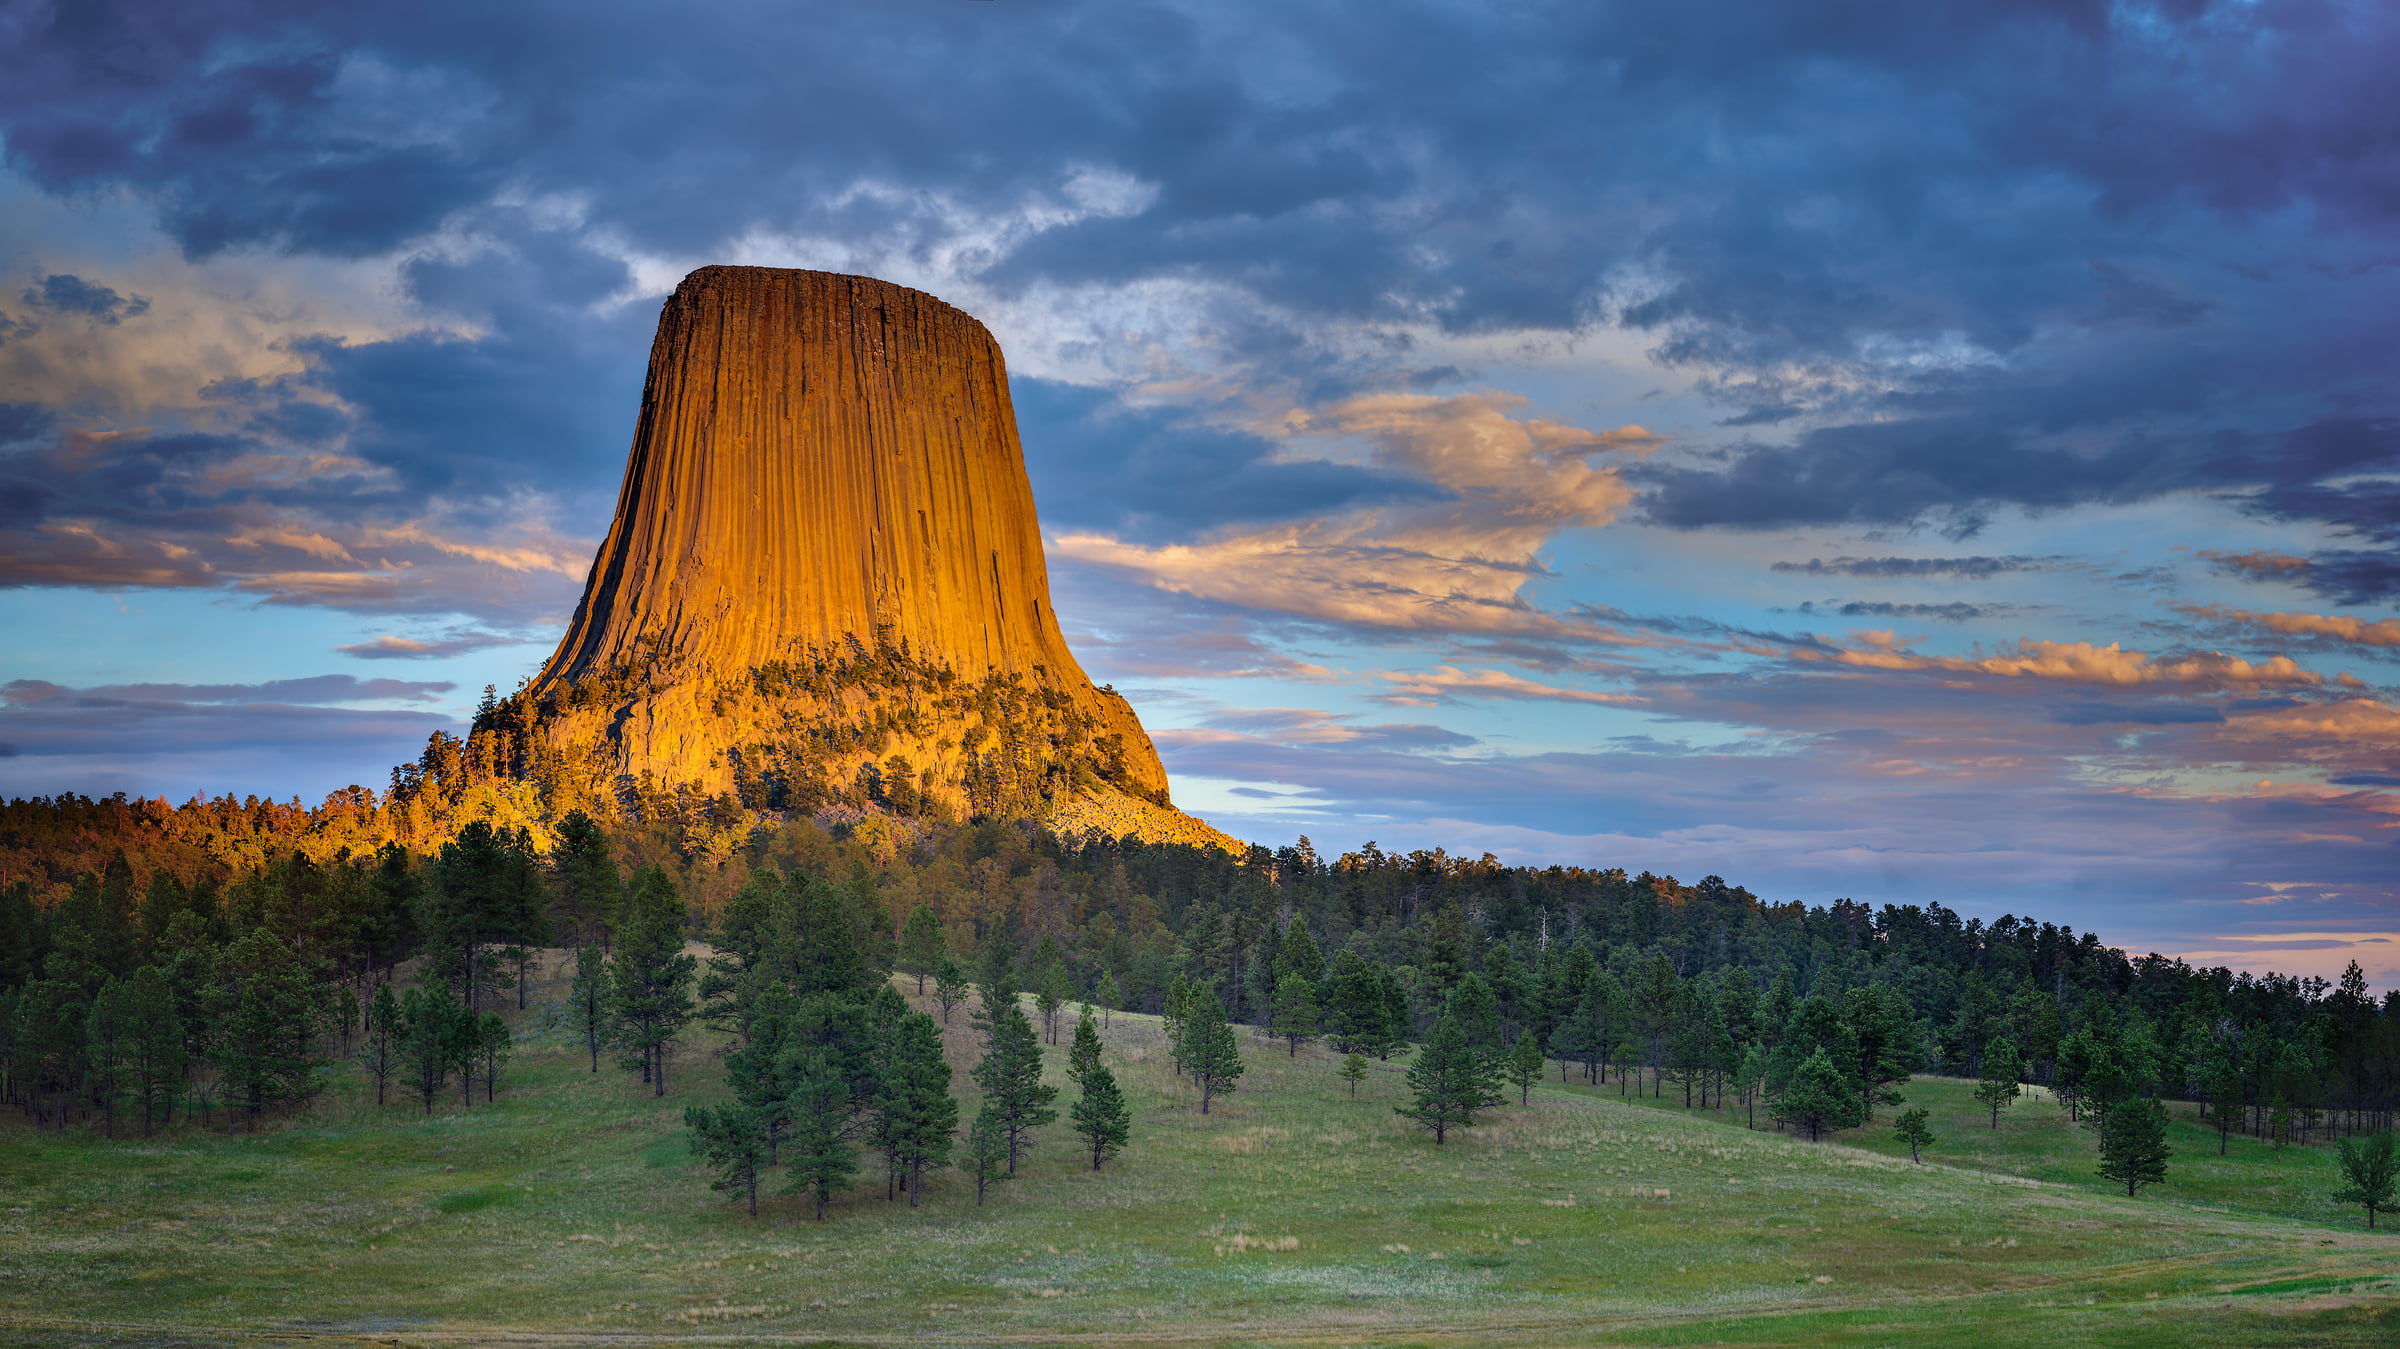 390 megapixels! A very high resolution, large-format VAST photo print of Devils Tower National Monument at sunset; landscape photograph created by John Freeman in Wyoming.